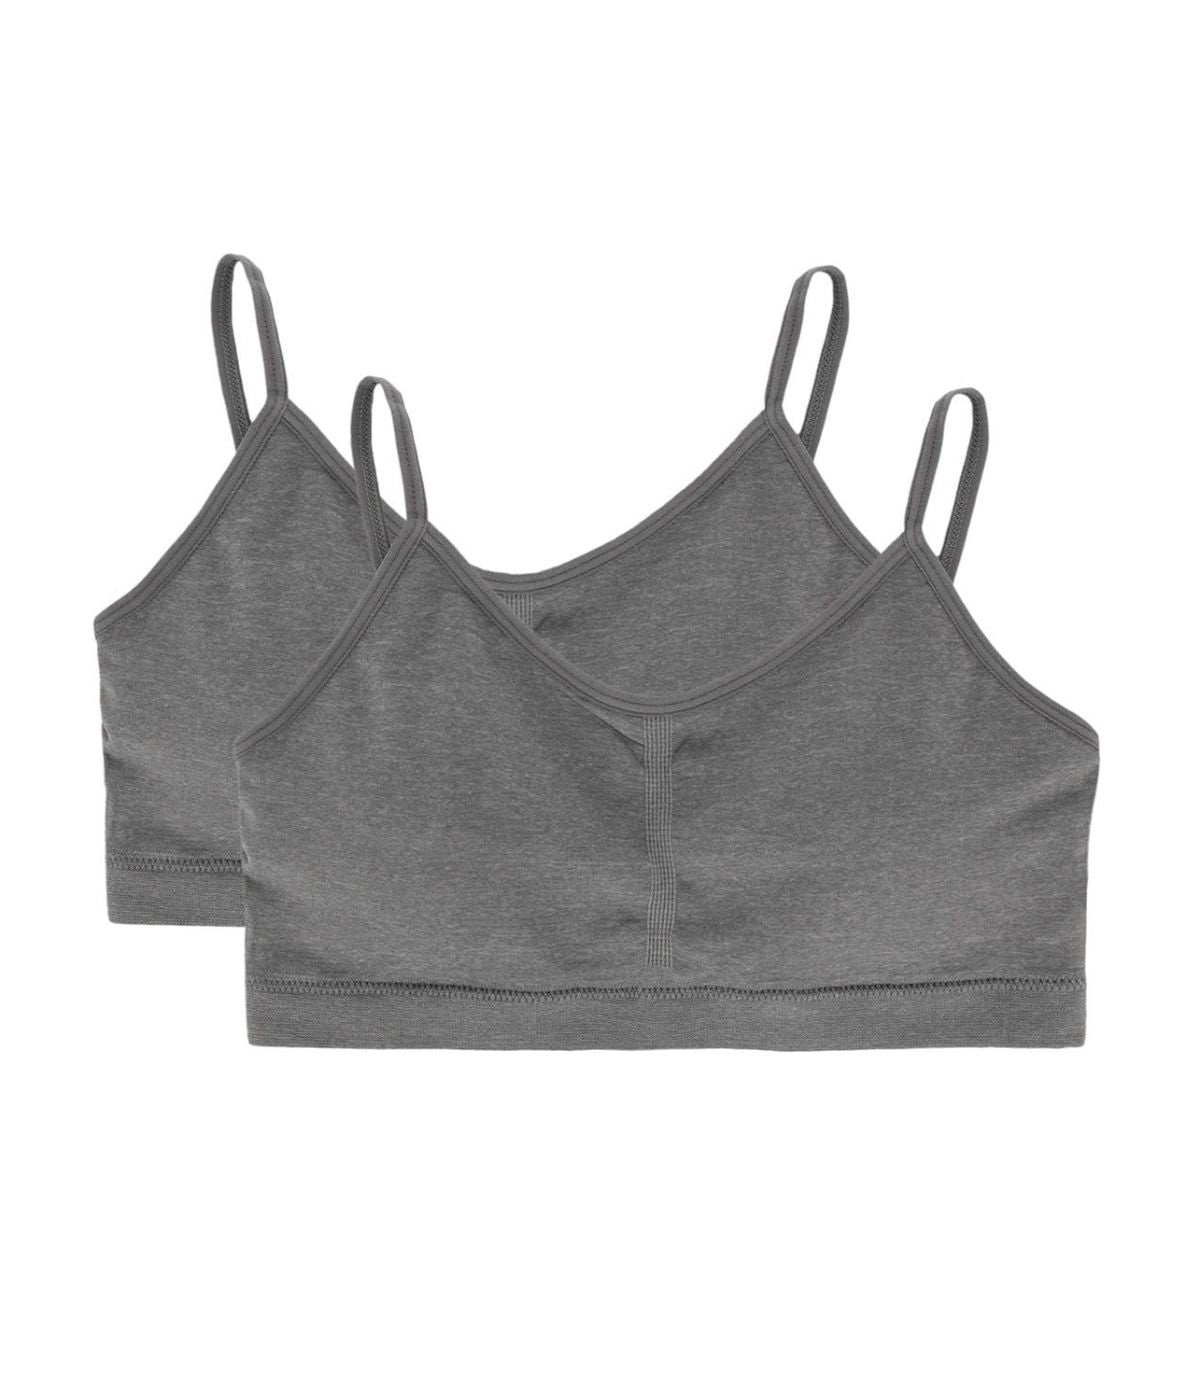 2 Pack Gathered Front Cup Training Bra Light Gray Heather